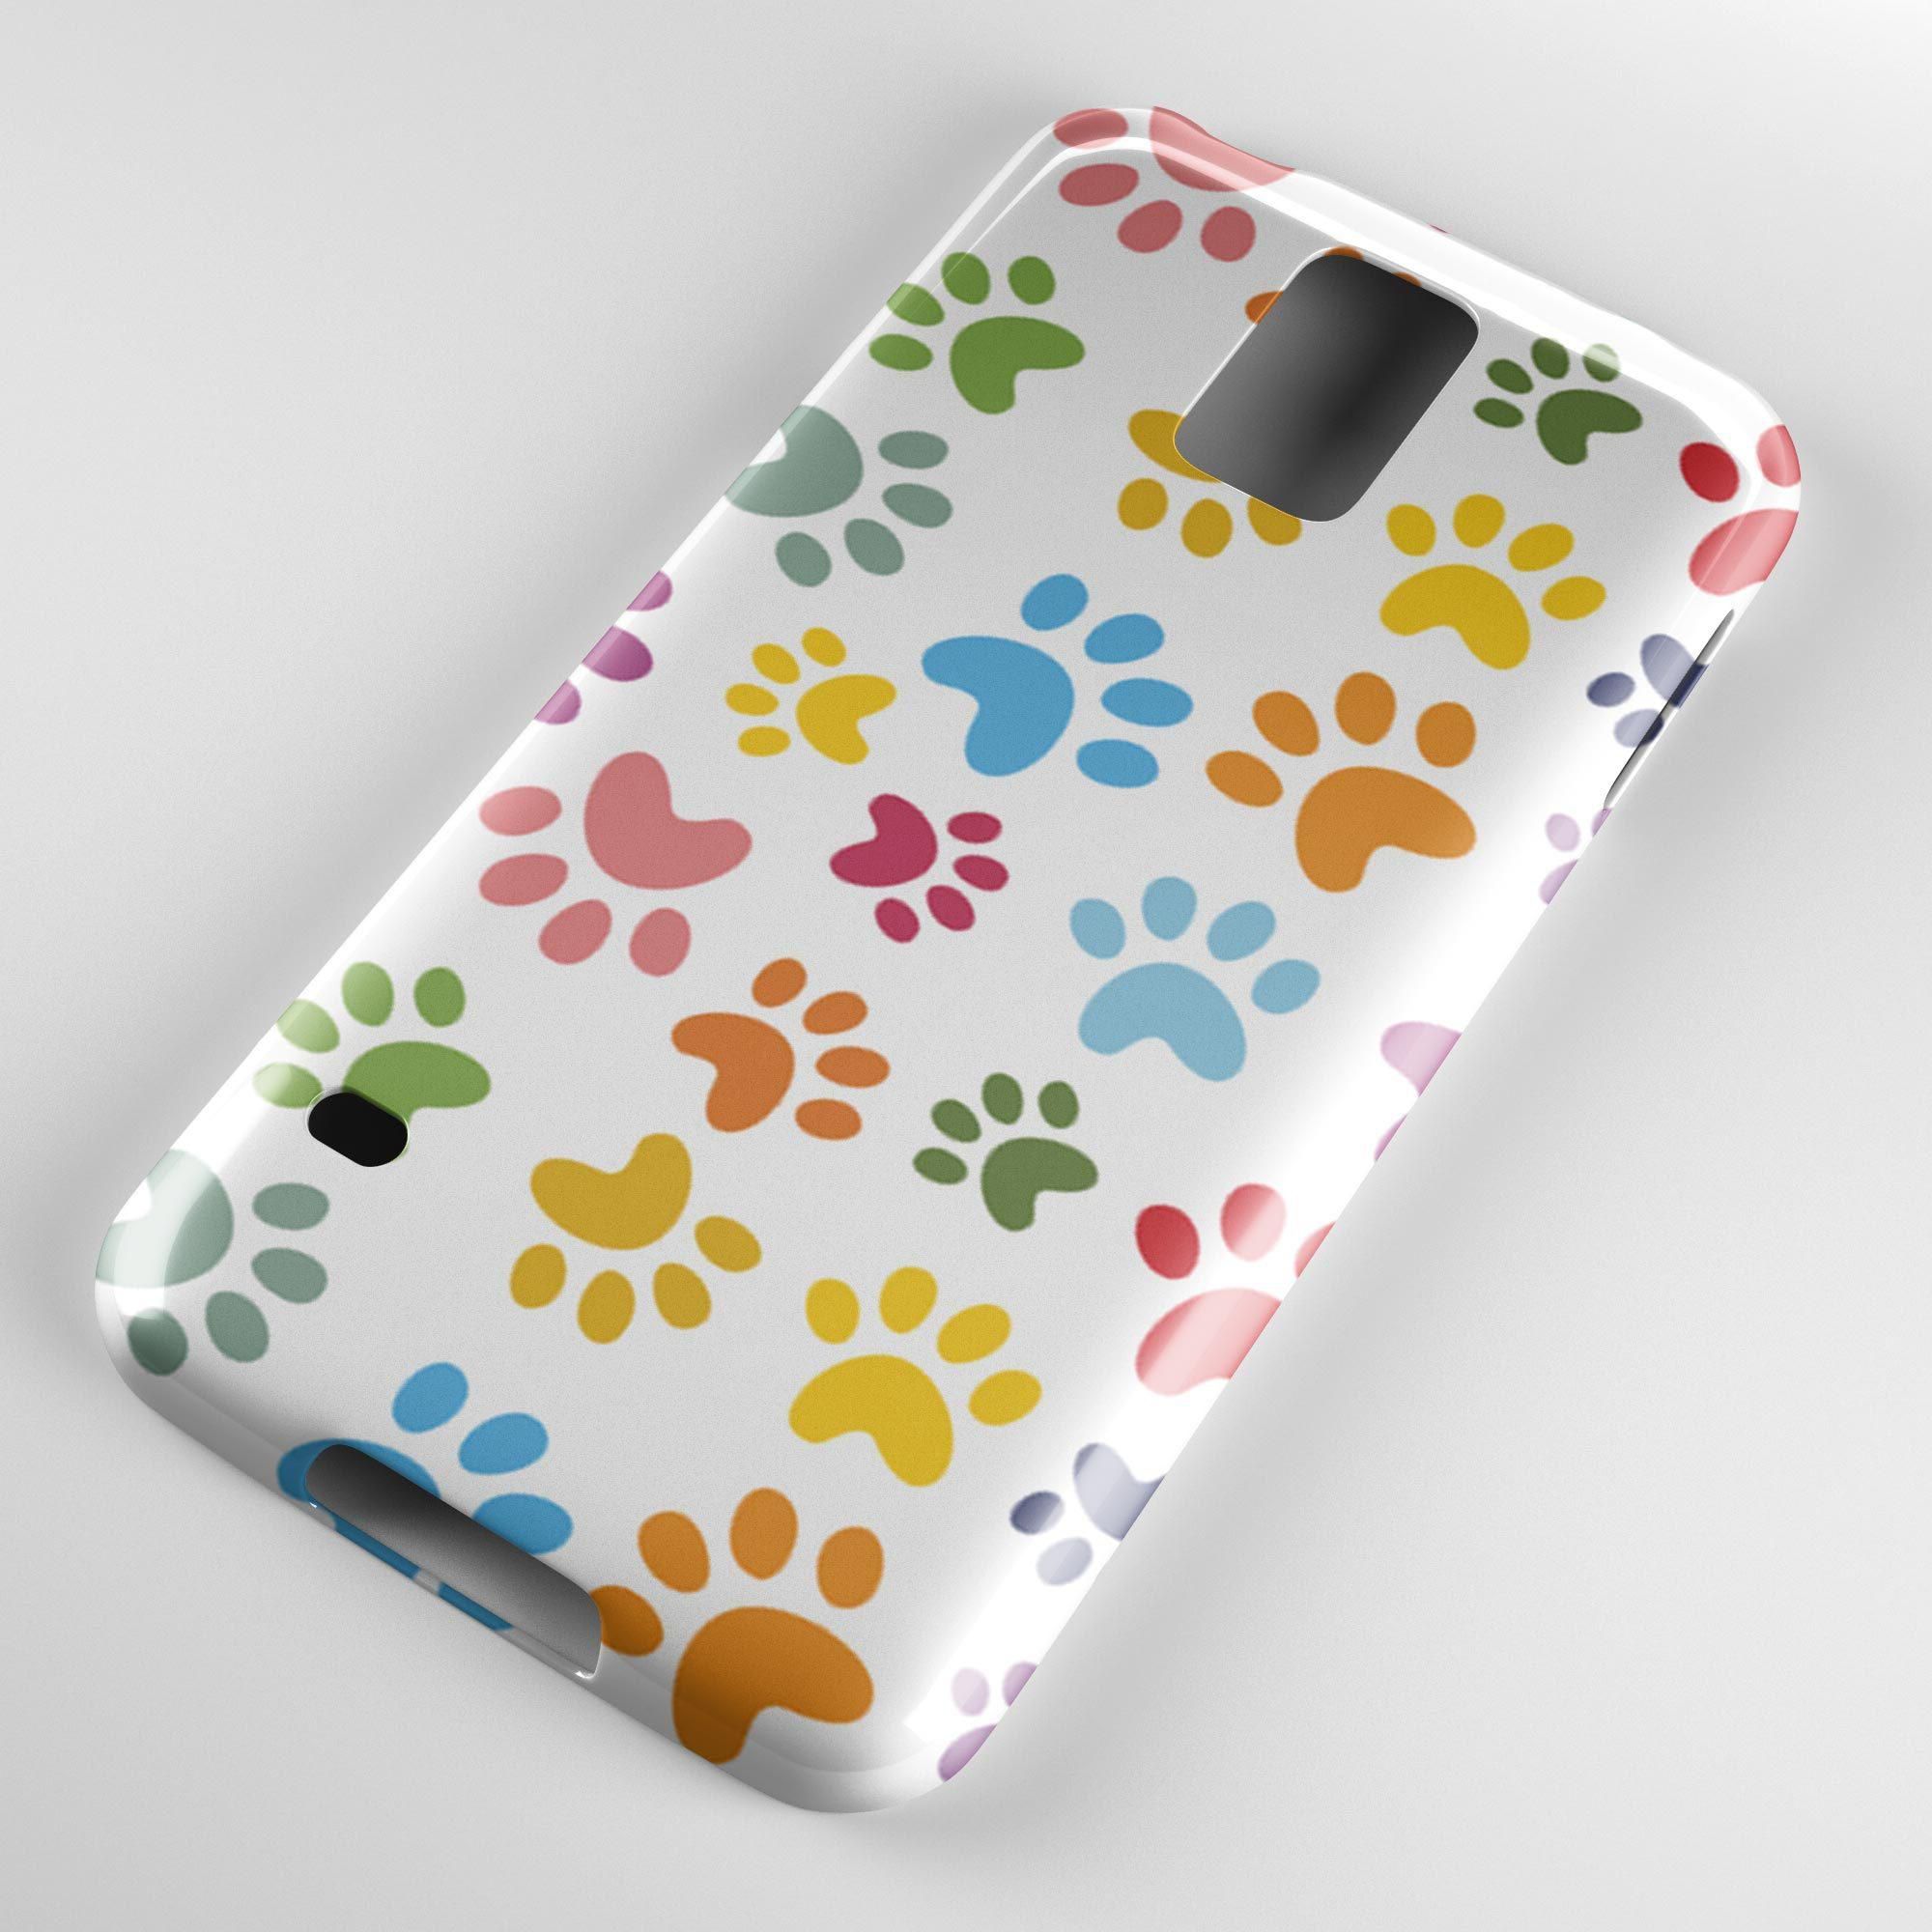 Coloured Footprint Paws Animal Cat Dog Rabbit Phone Case Cover for Samsung S5